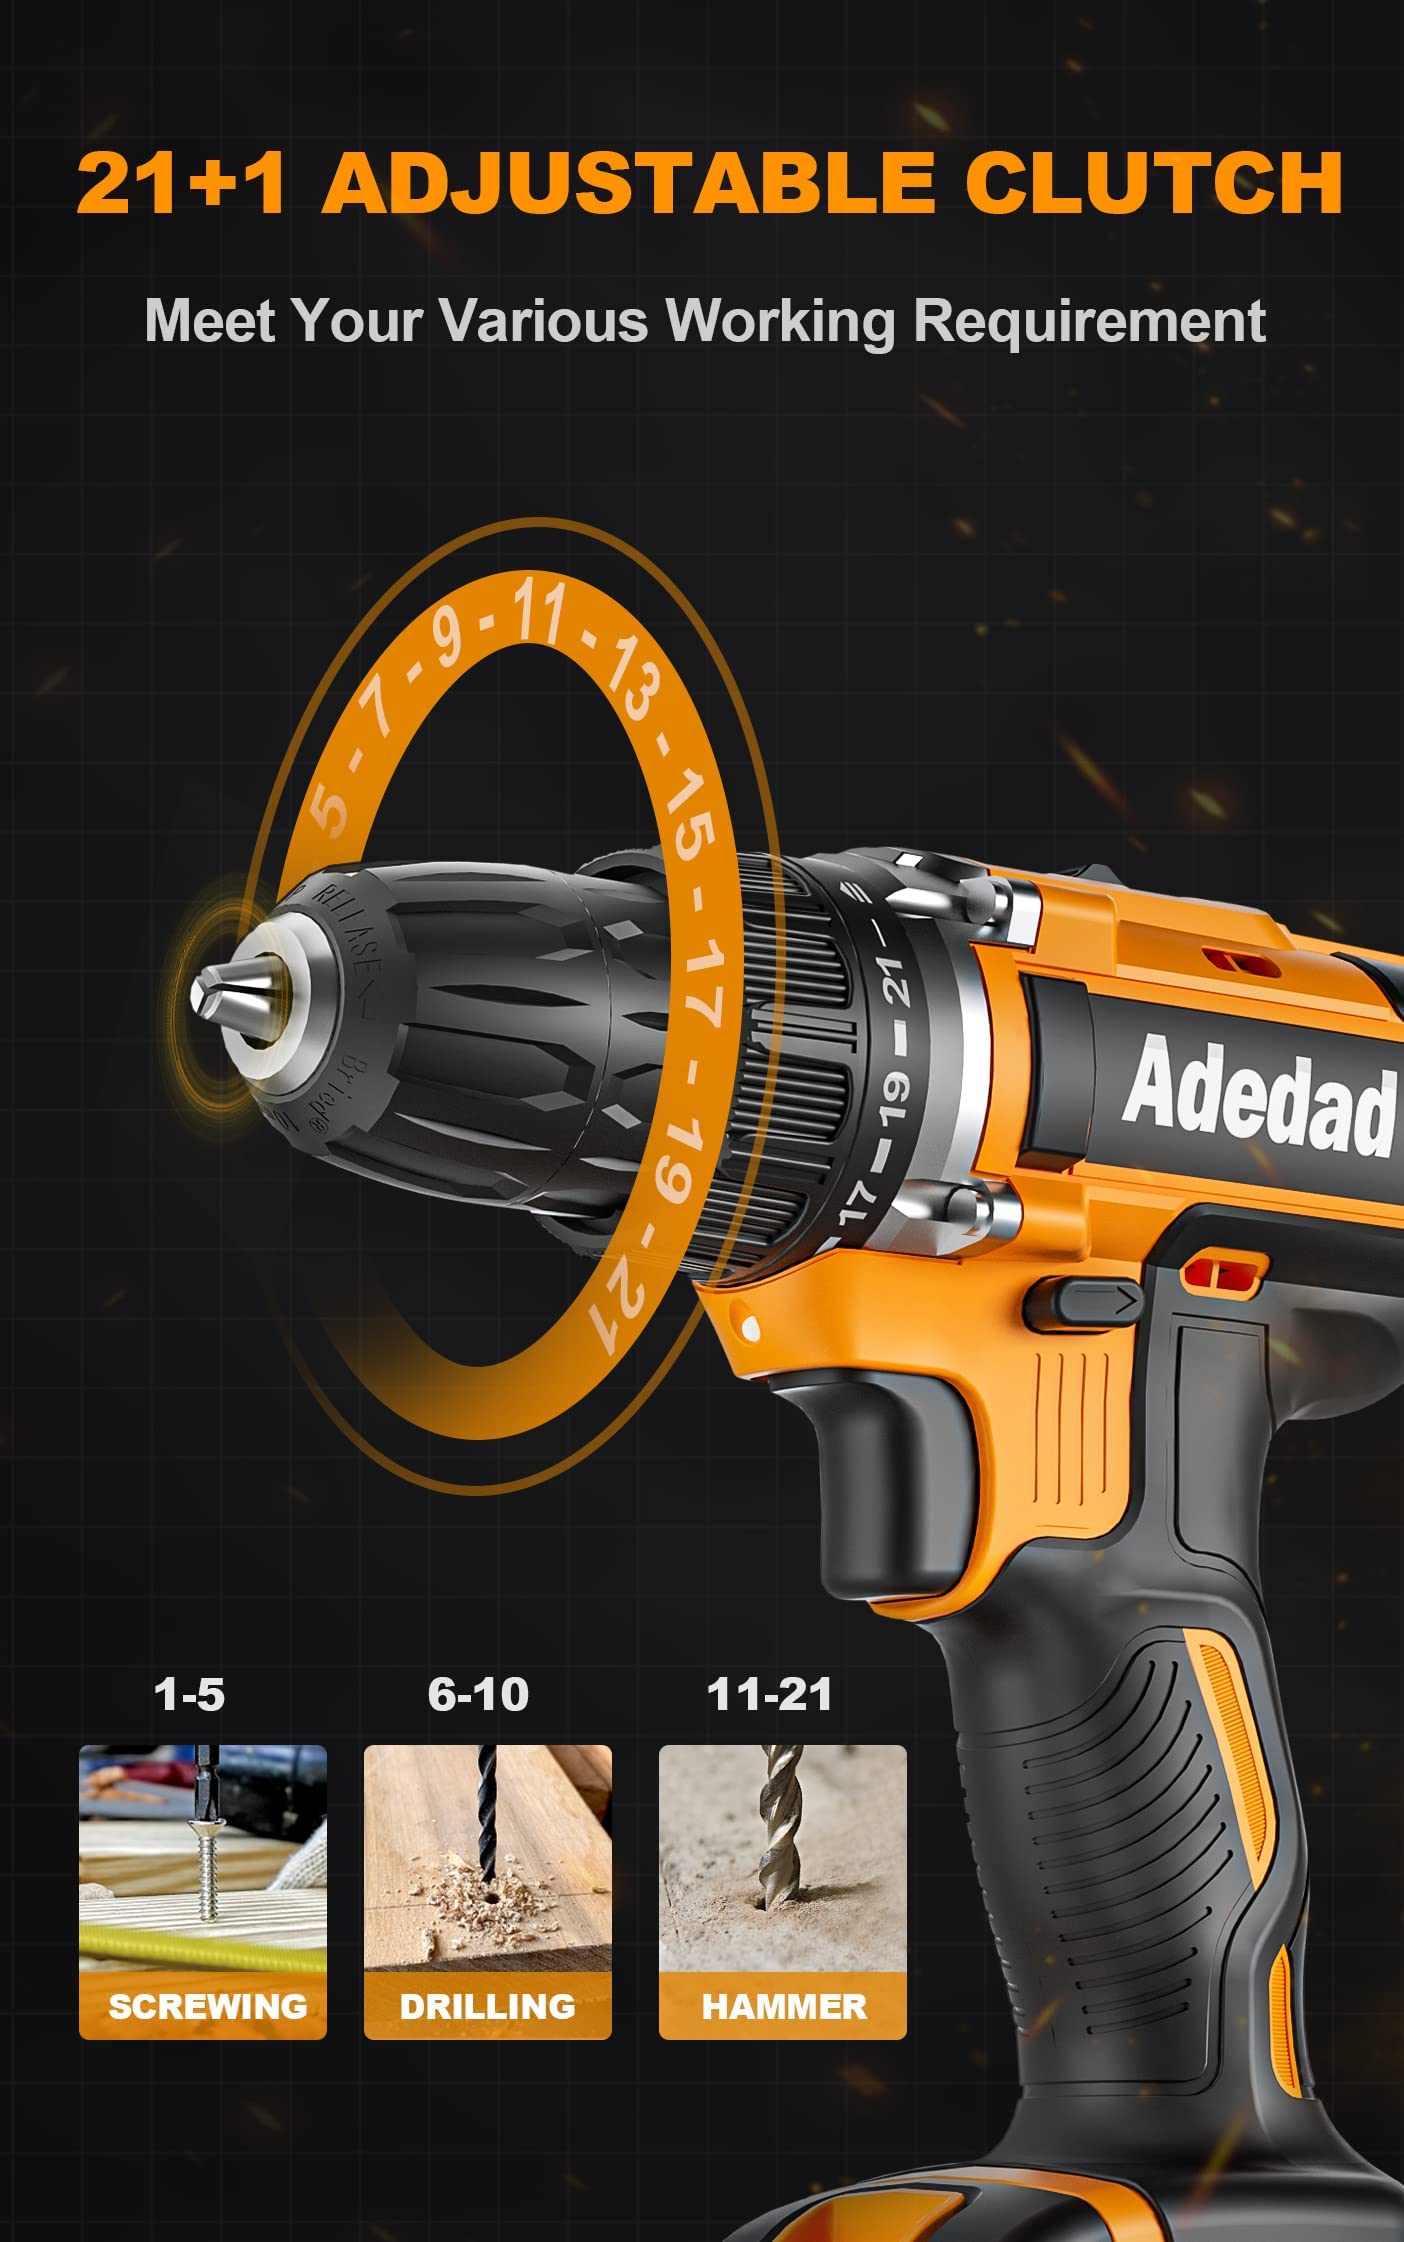 Adedad 20V Cordless Drill Set Electric Power Drill Kit with Battery and Charger, 3/8 Inch Keyless Chuck, 21+1 Position,2 Variable Speed, LED Light and 27pcs Accessories